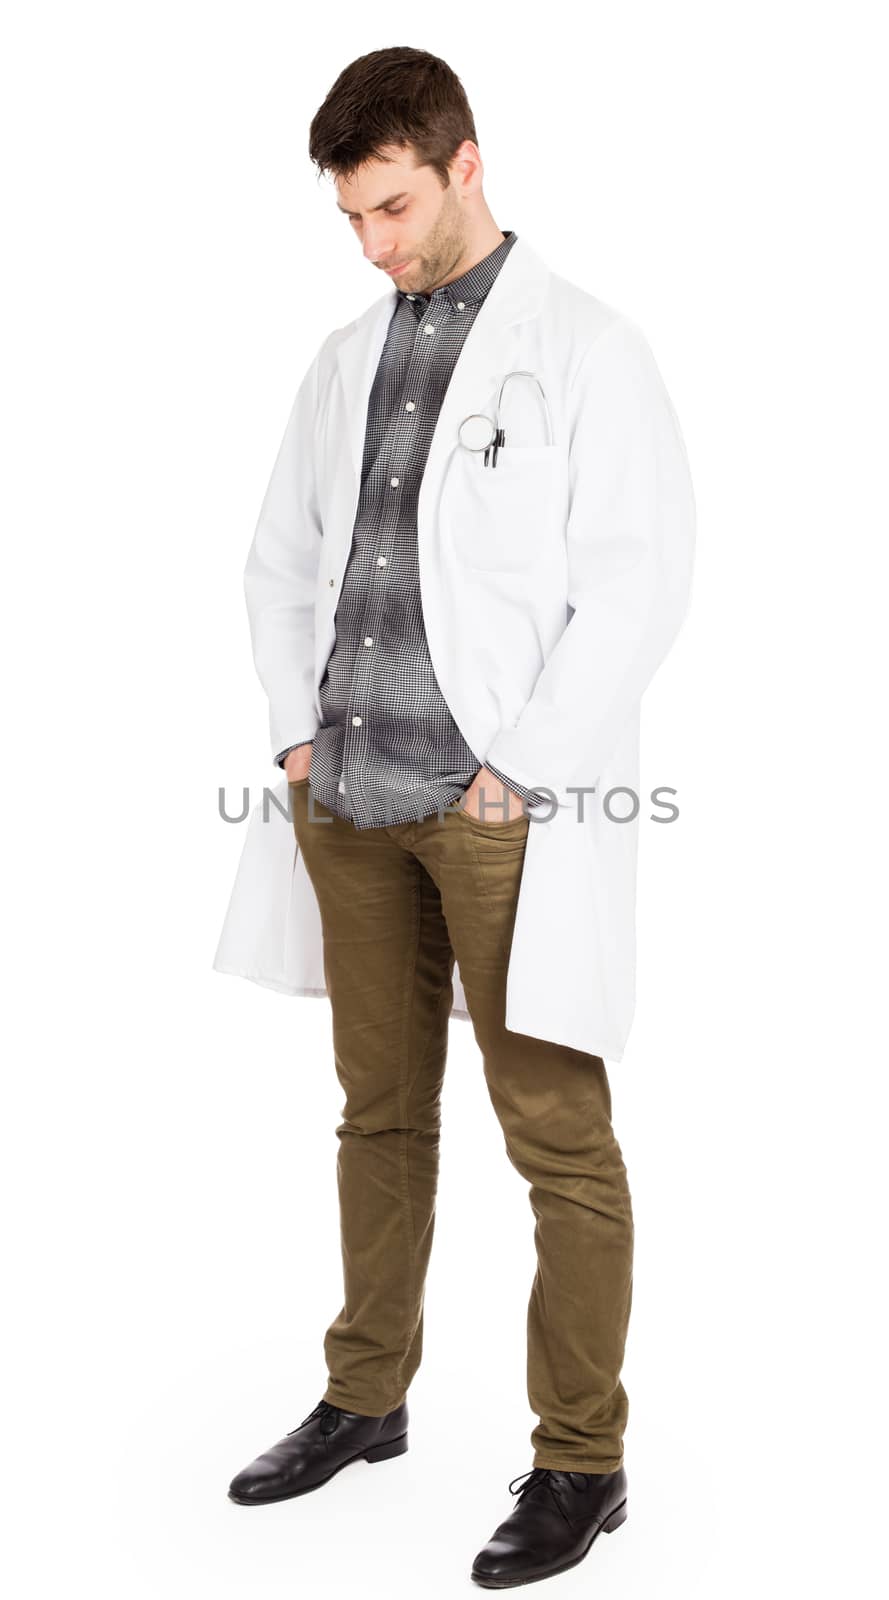 Male doctor, concept of healthcare and medicine - Isolated on white